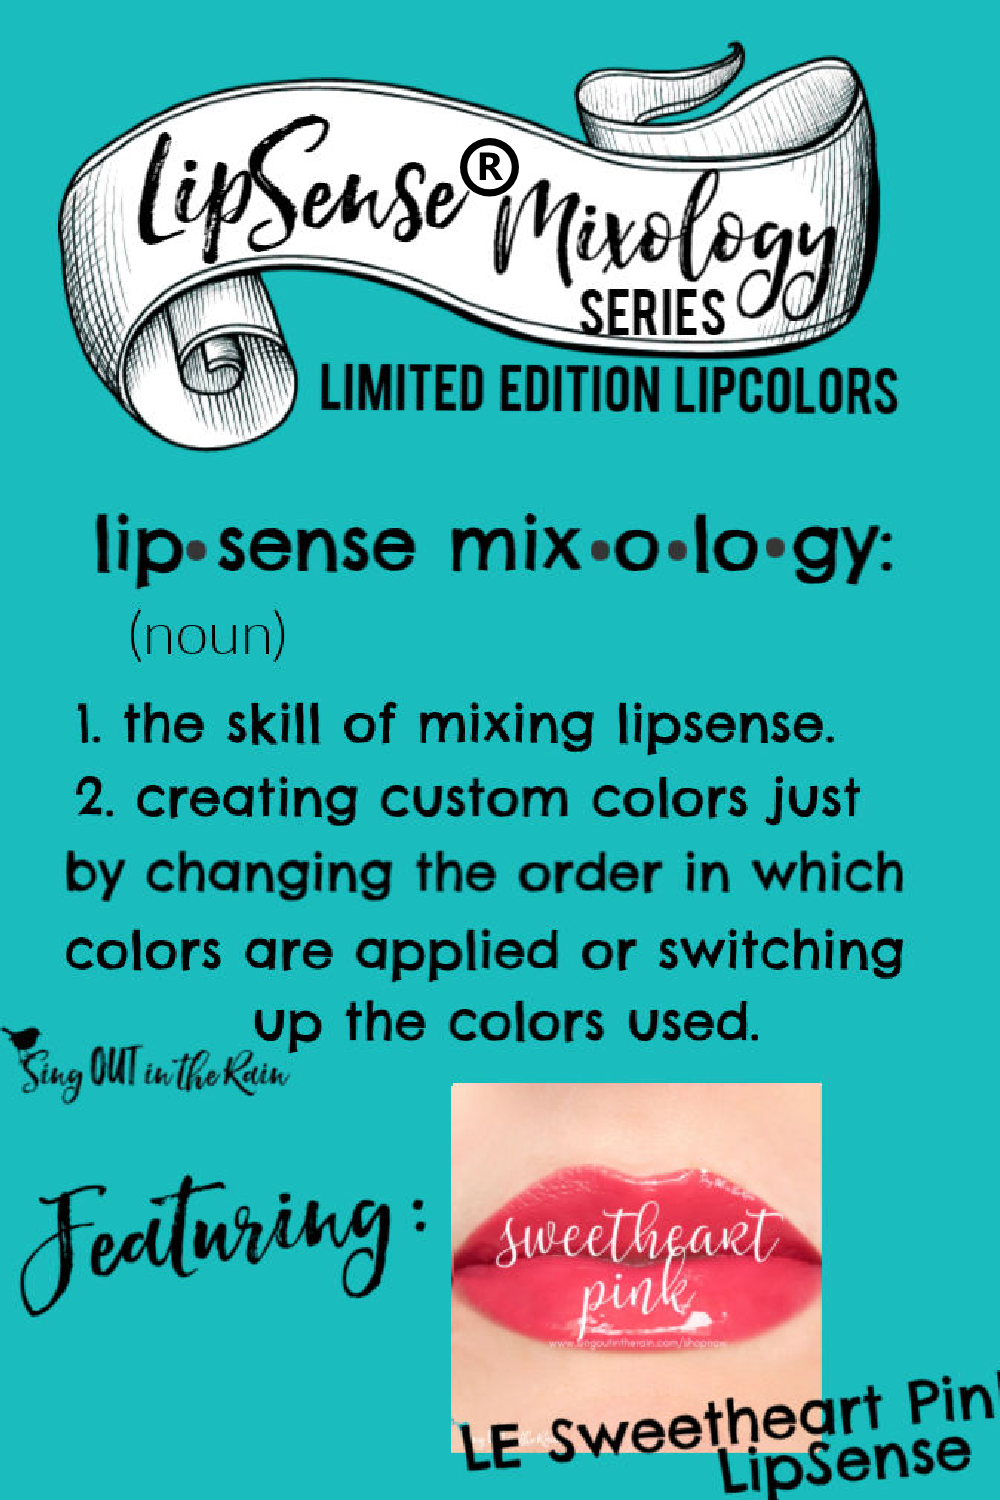 The Ultimate Guide to Sweetheart Pink LipSense Mixology